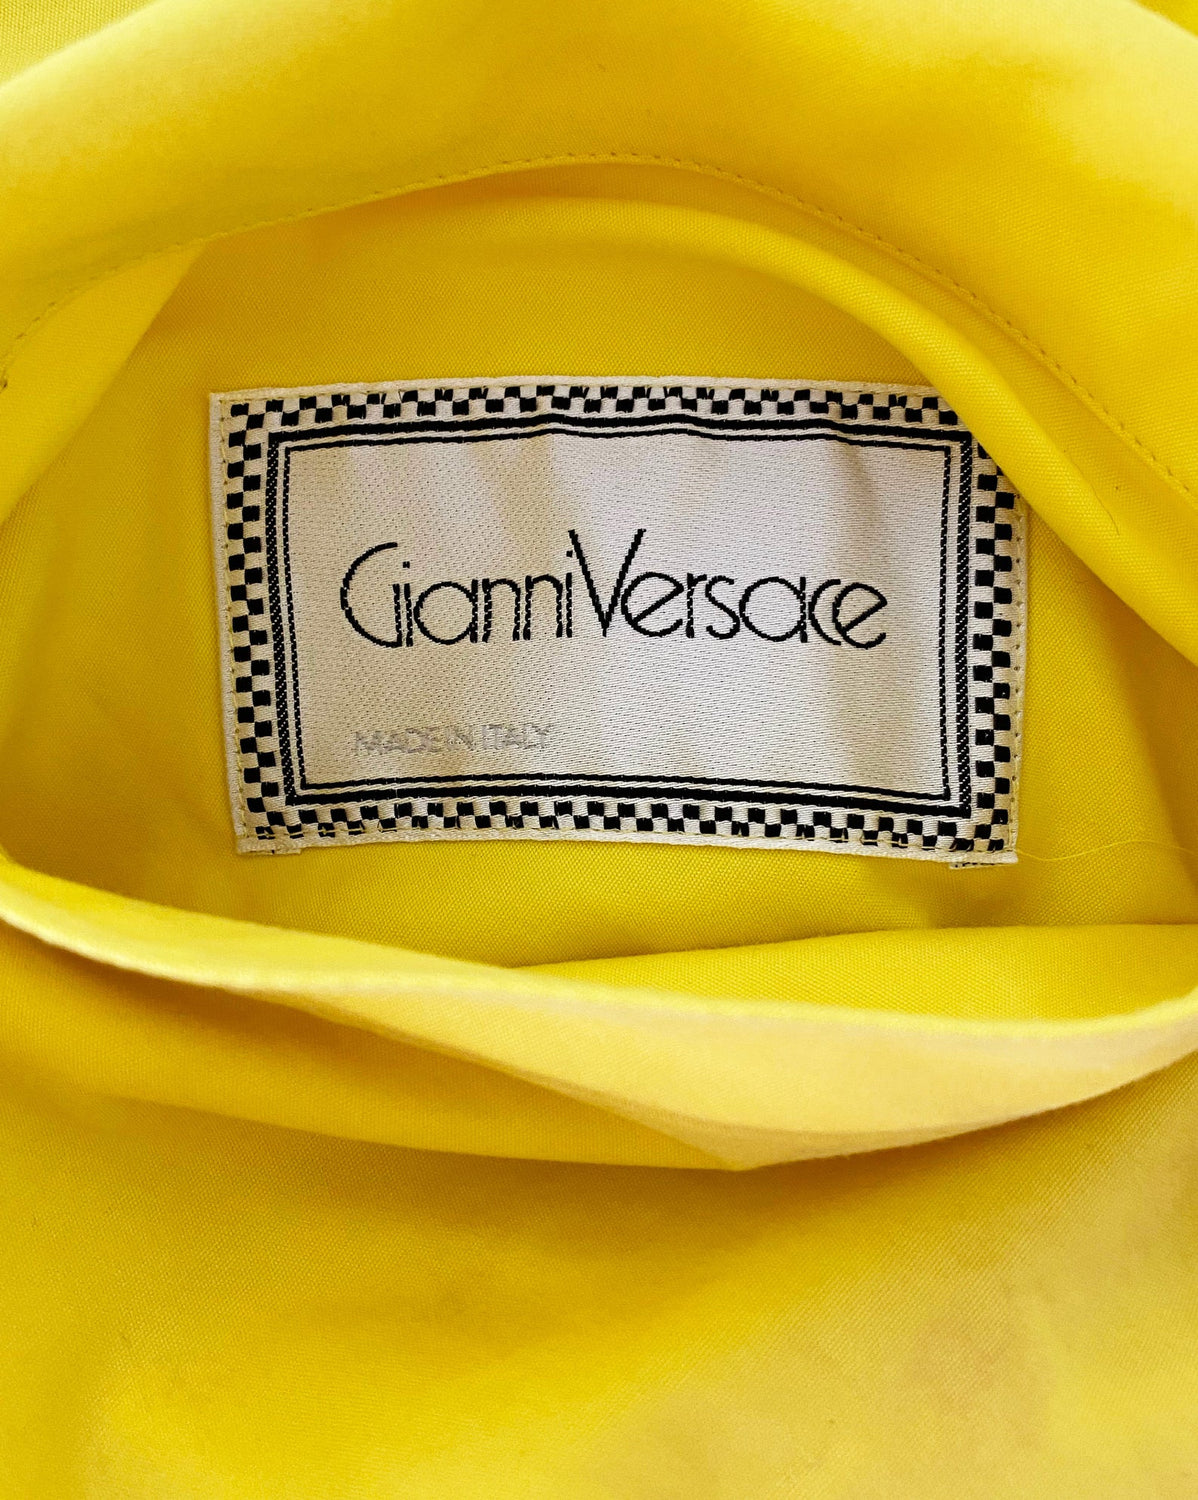 FRUIT Vintage Gianni Versace Vogue print coat from the iconic Spring 1991 runway collection. It features the iconic Vogue print in large scale all over and is fully reversible with a yellow cotton lining. This coat is a true piece of fashion history!